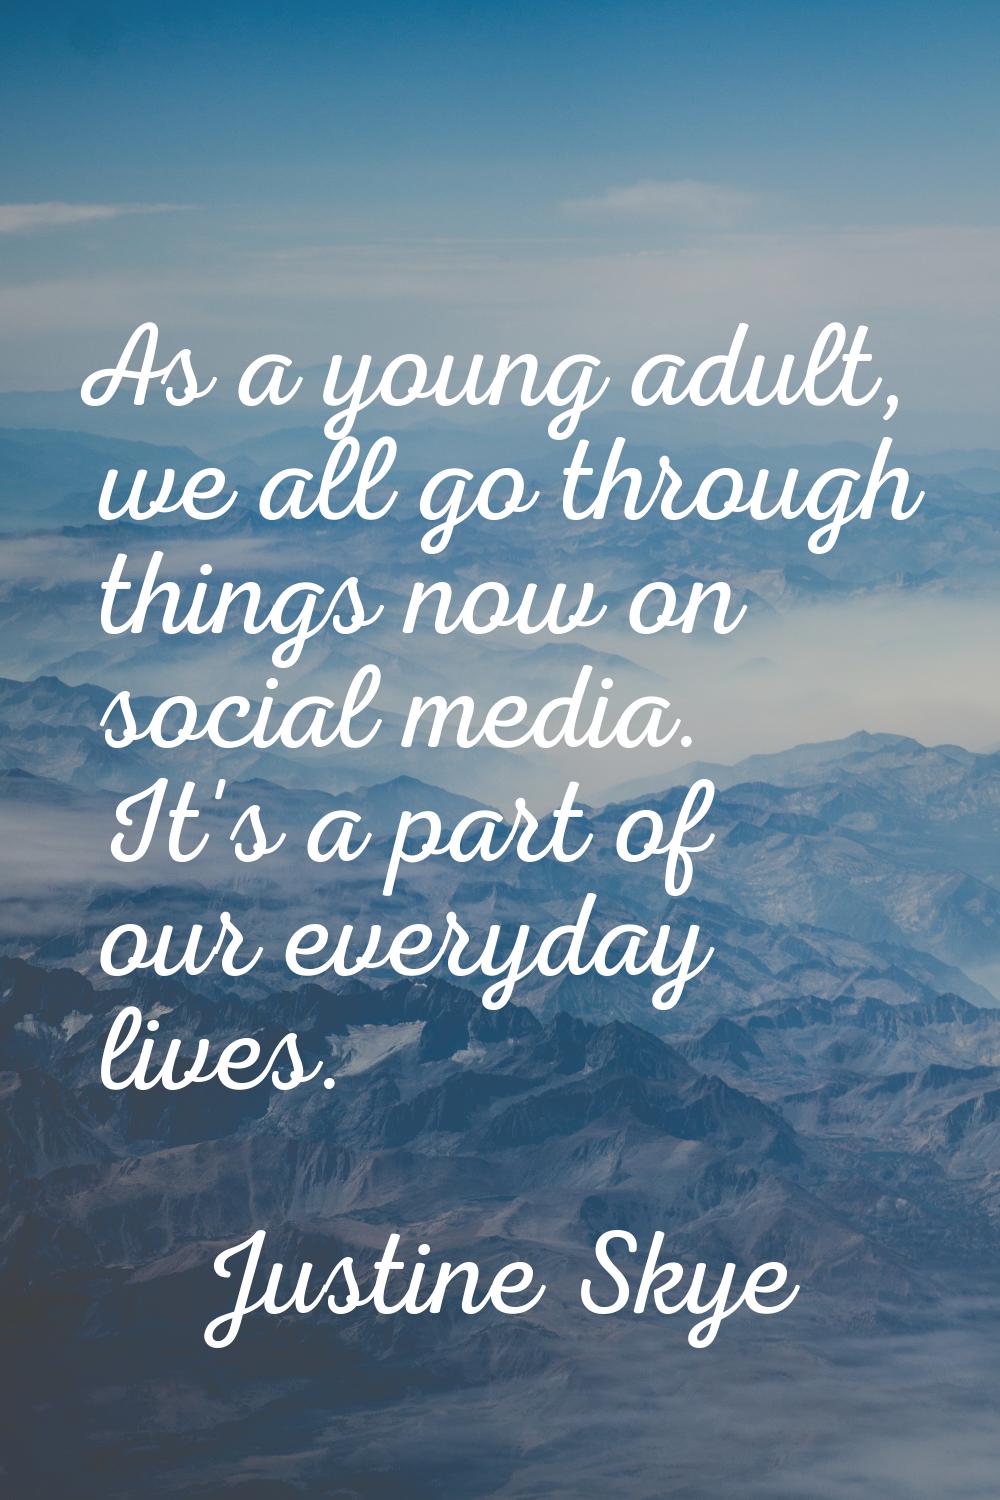 As a young adult, we all go through things now on social media. It's a part of our everyday lives.